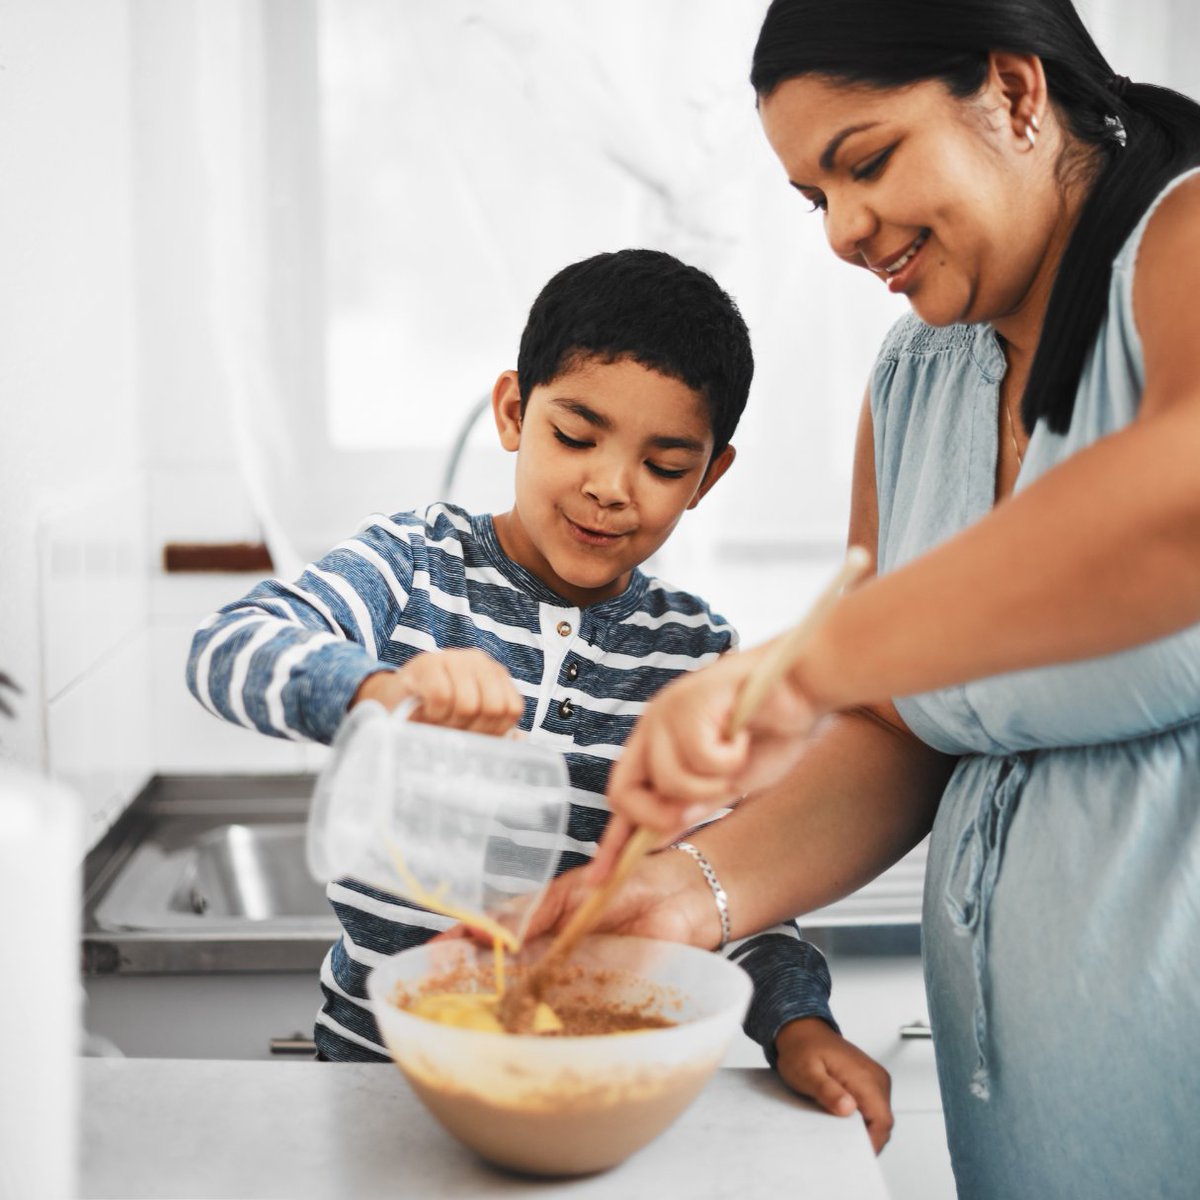 Whip up some fun on #TastyTuesday! 😋 Stirring, measuring, and baking are not just delicious but also a recipe for building math prowess. Dive into these 10 baking tricks to mix math into your kitchen creations: naeyc.org/resources/blog…